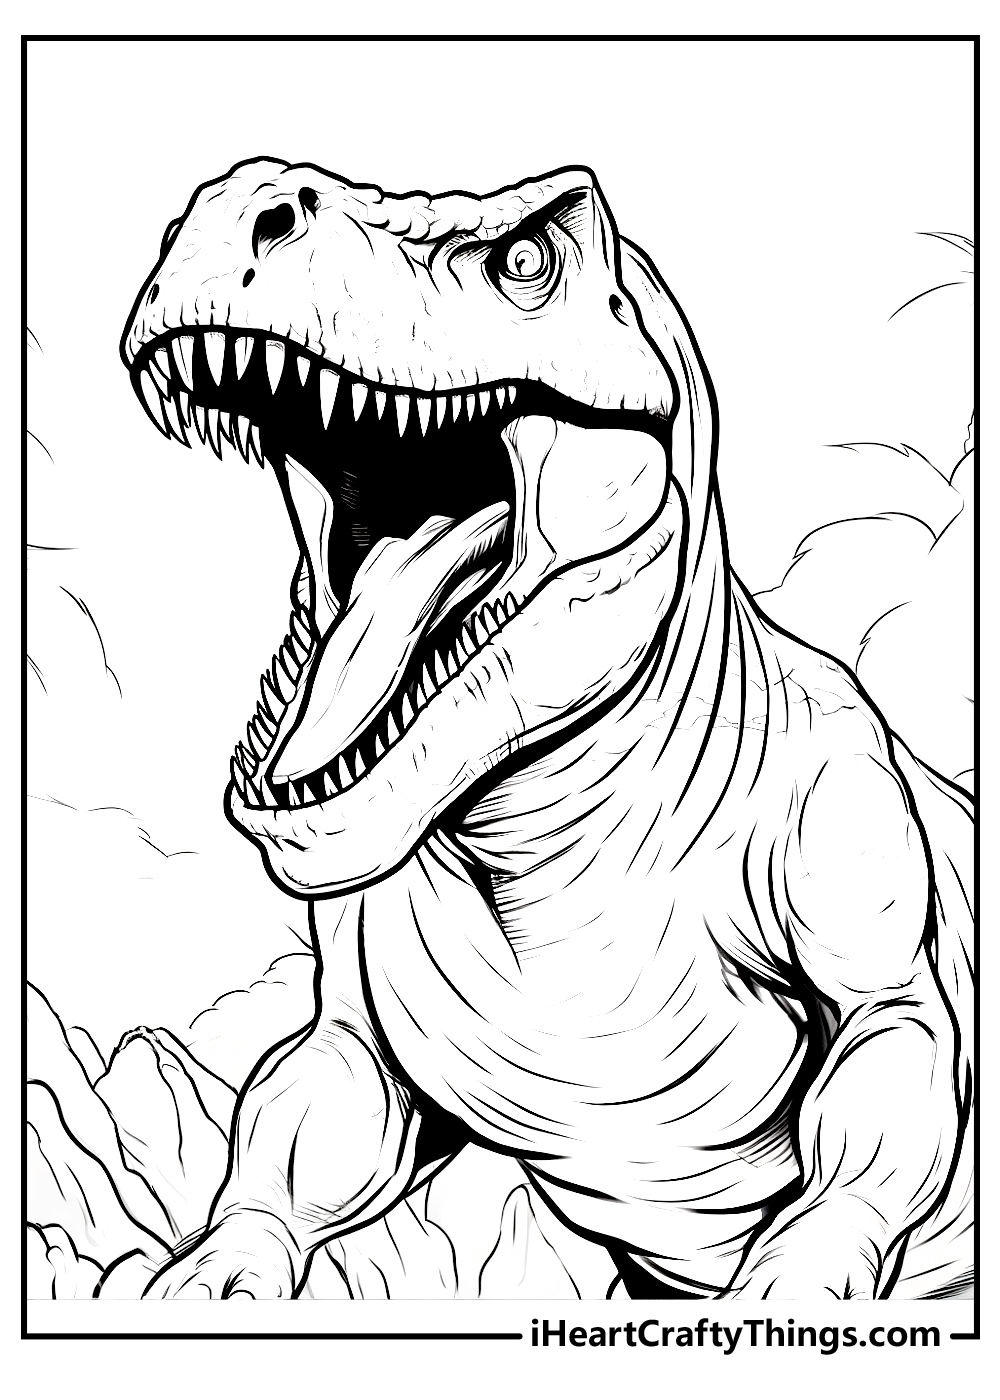 tyrannosaurus coloring pages for kids